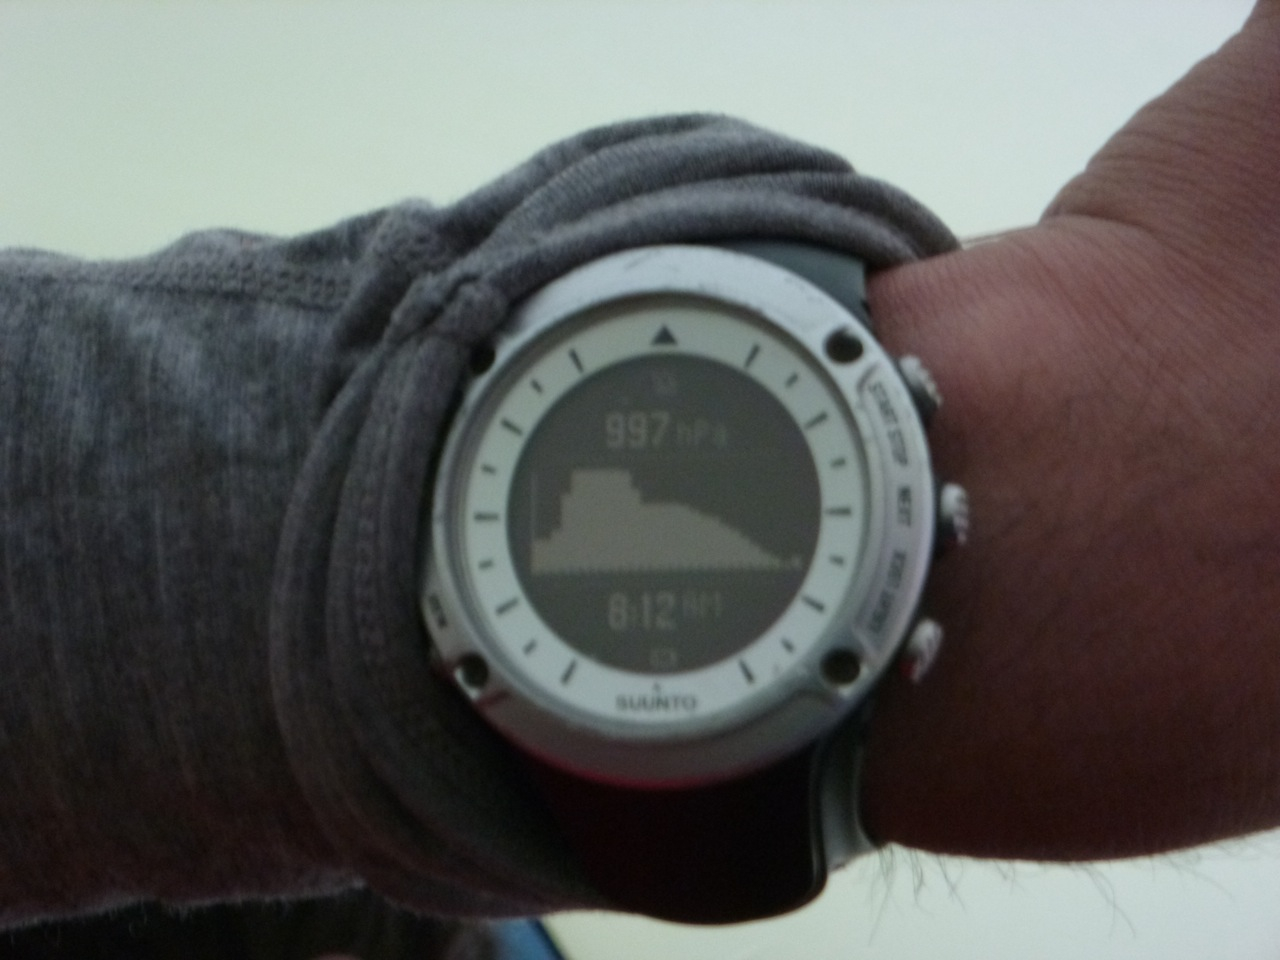 A watch face depicts dropping barometric pressure as a storm rolls in